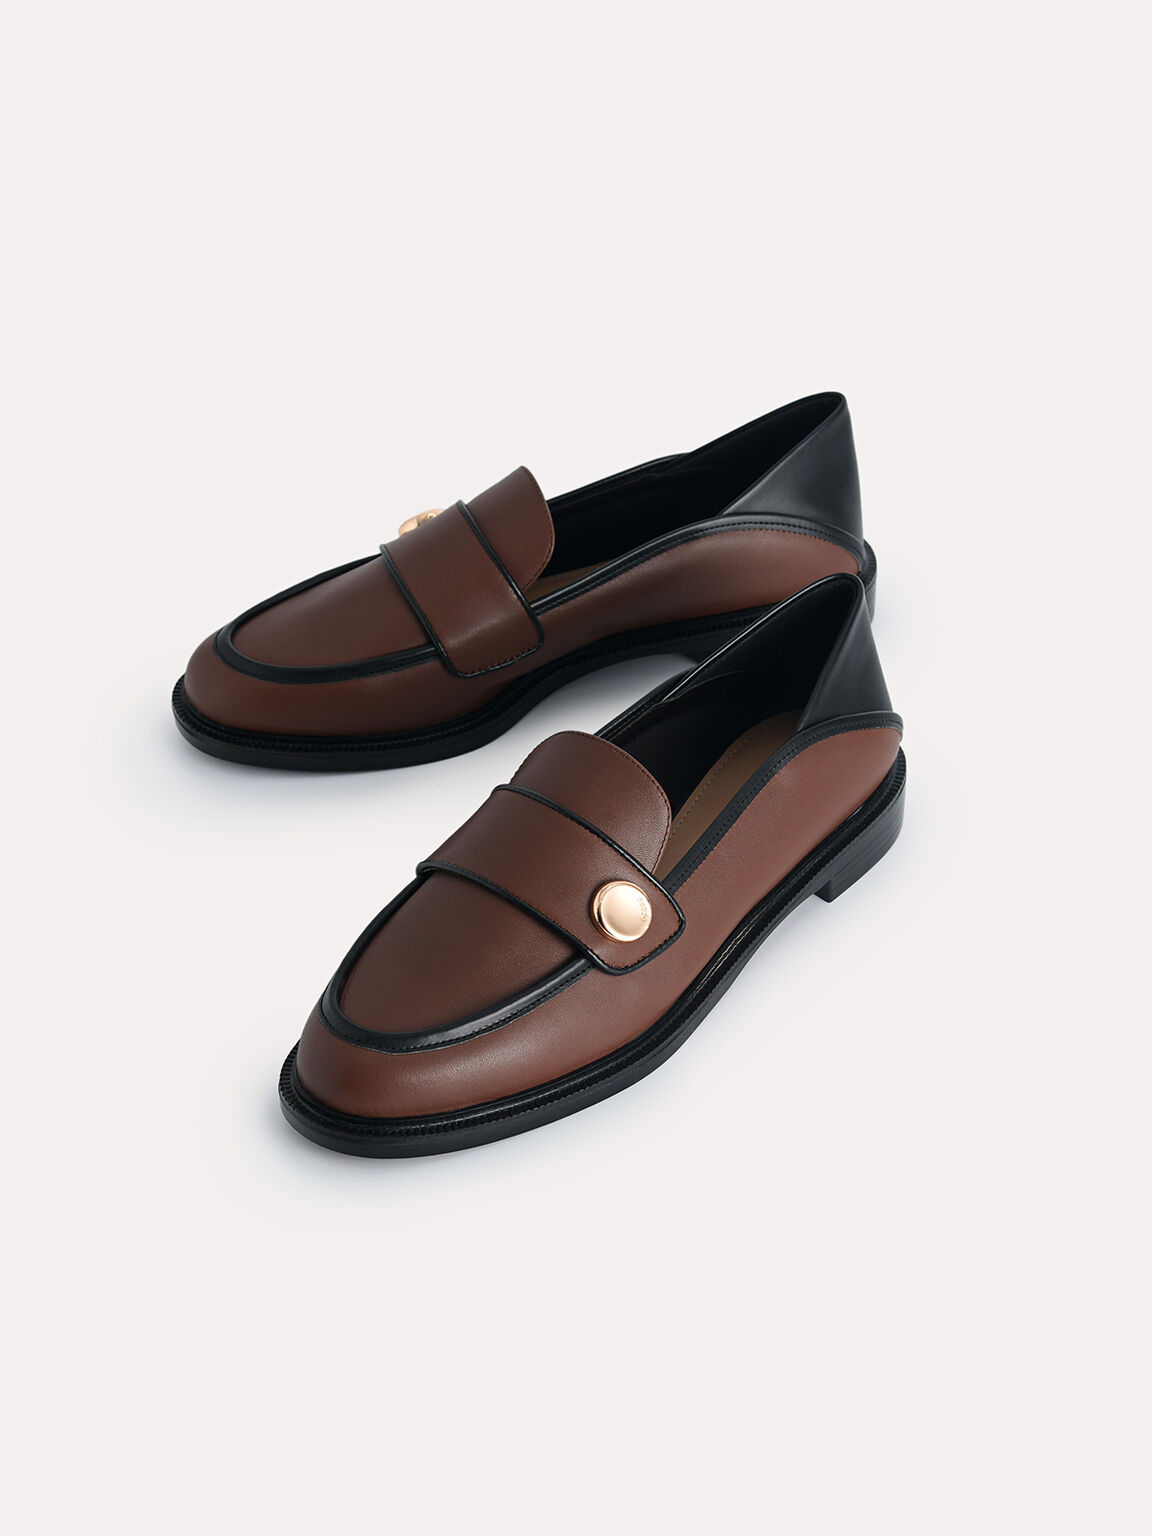 Leather Loafers, Dark Brown, hi-res